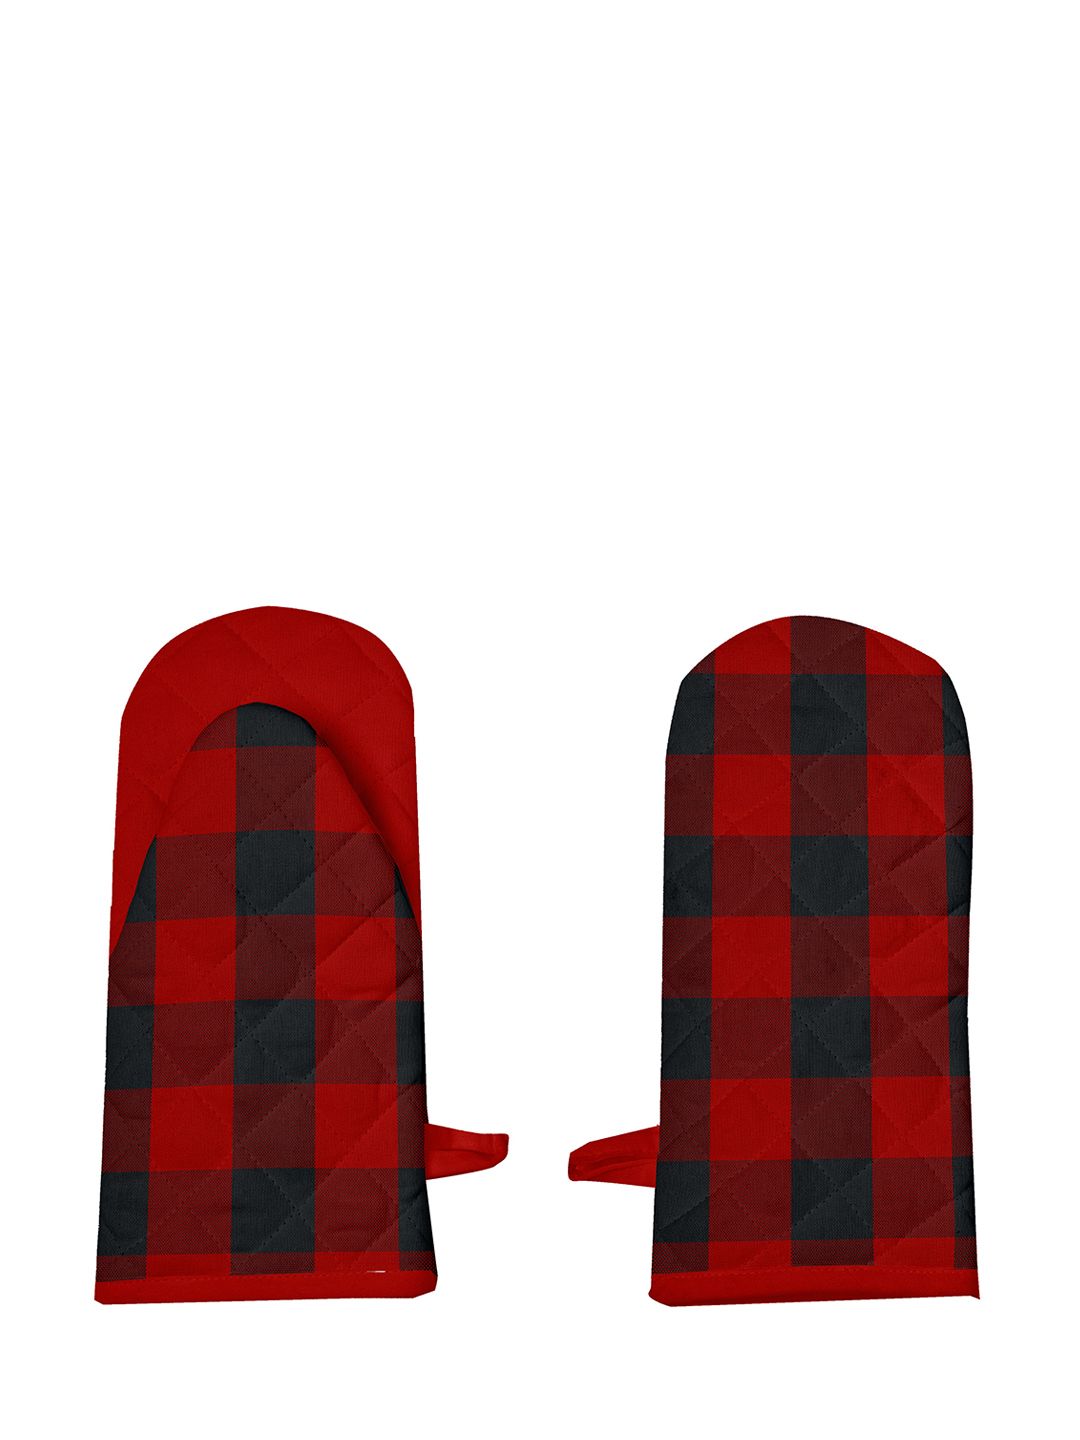 Lushomes Woman Set Of 2 Red & Black Buffalo Checked Oven Gloves Price in India